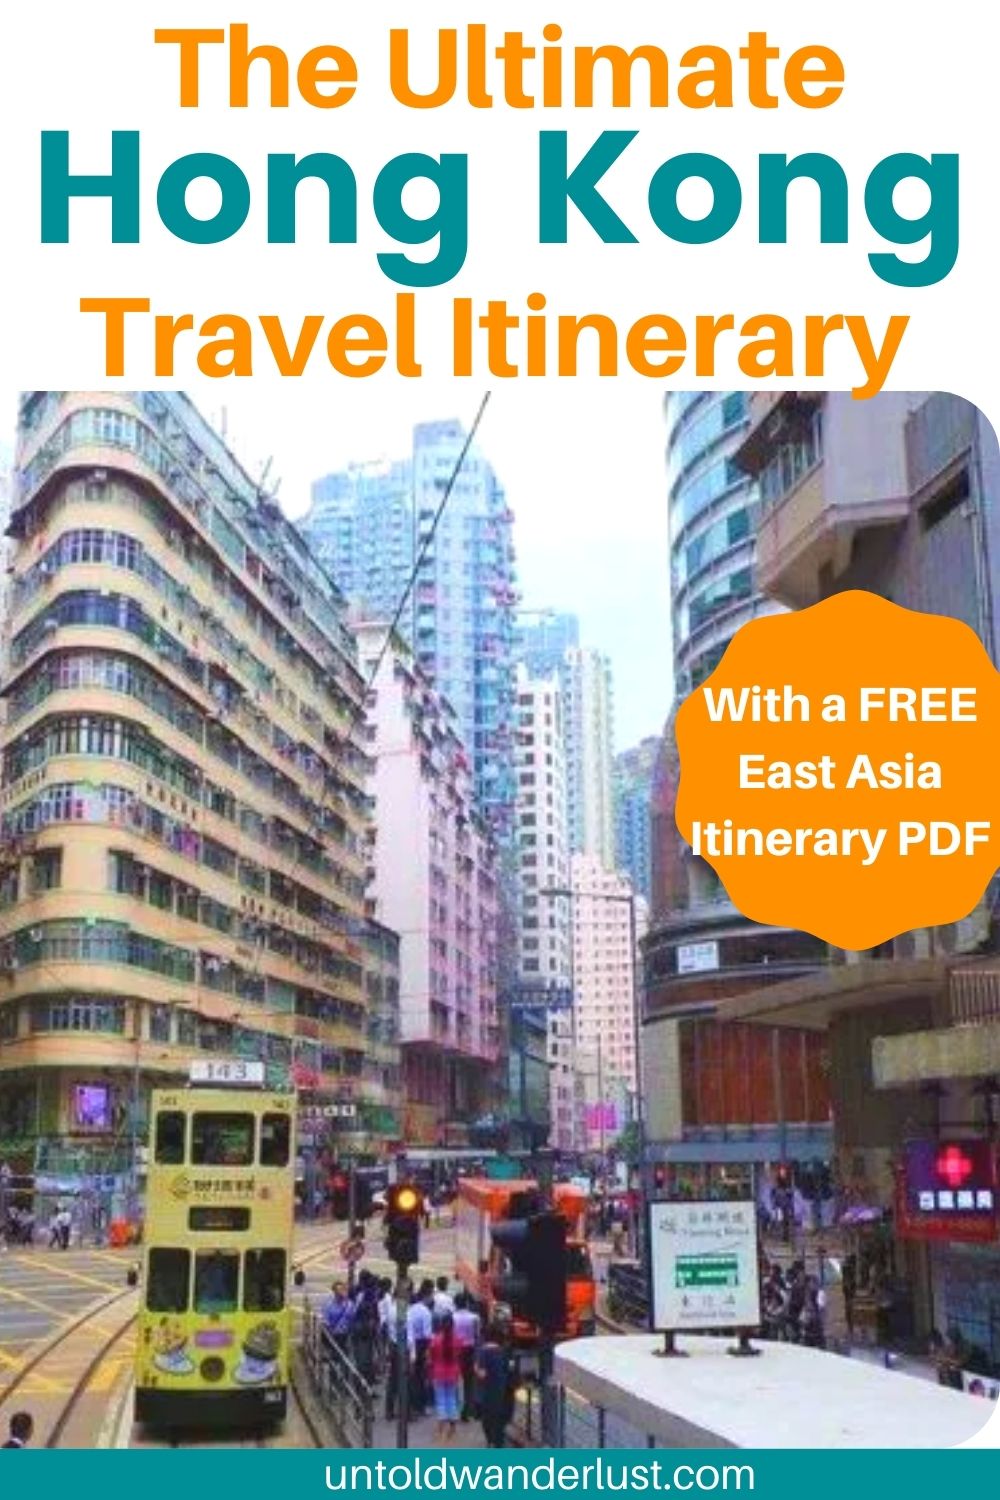 The Ultimate Hong Kong Travel Itinerary on a Budget